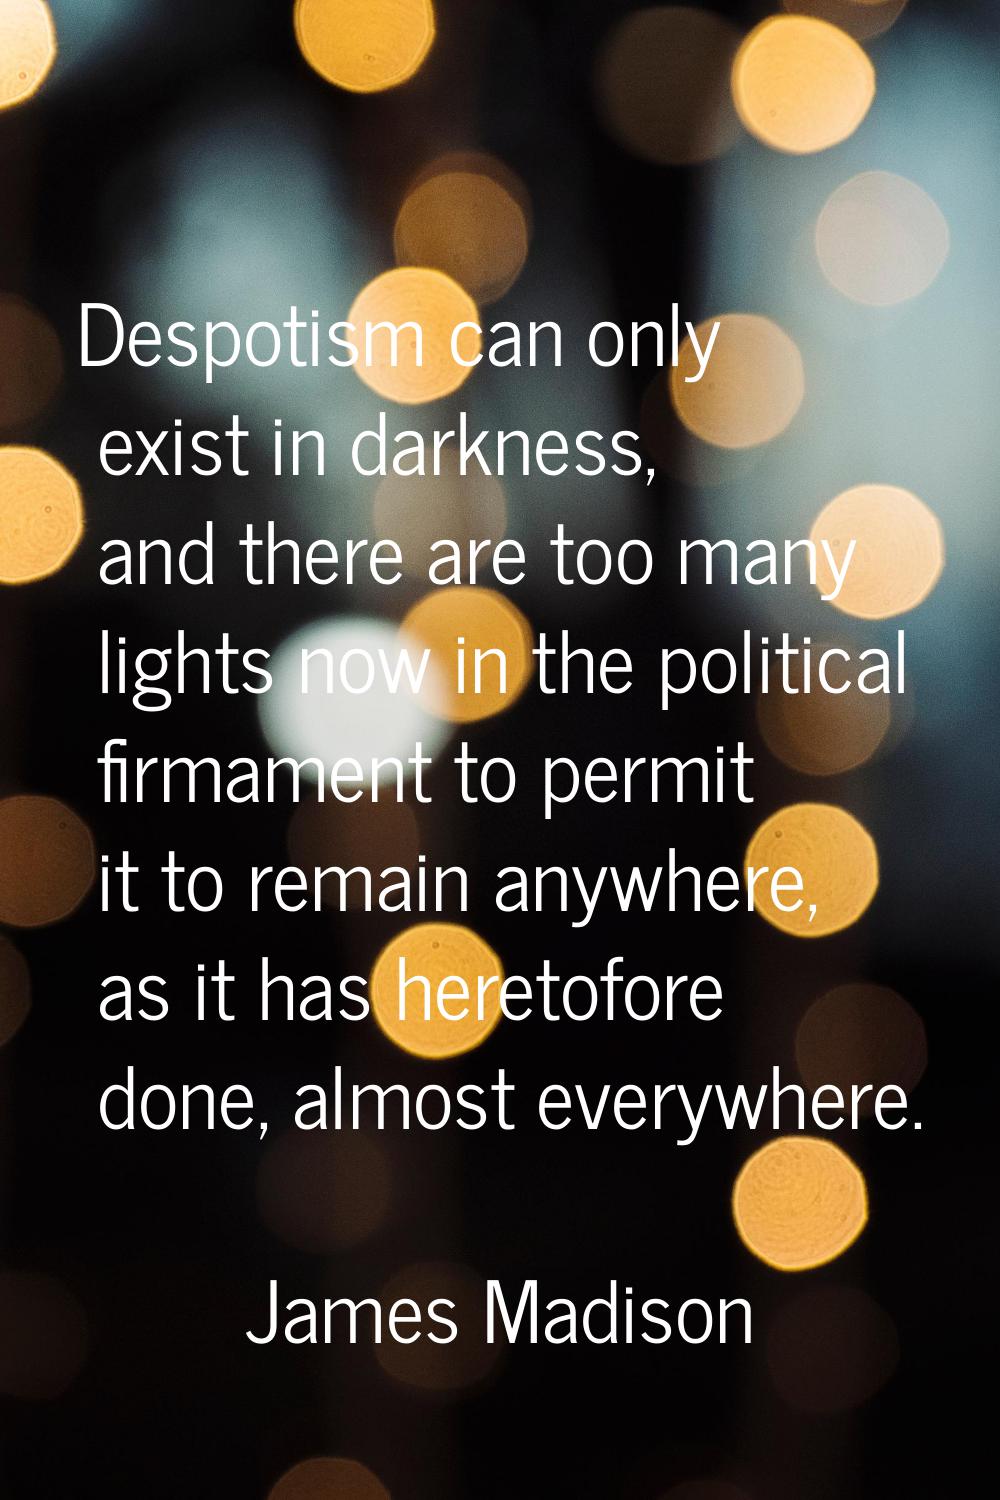 Despotism can only exist in darkness, and there are too many lights now in the political firmament 